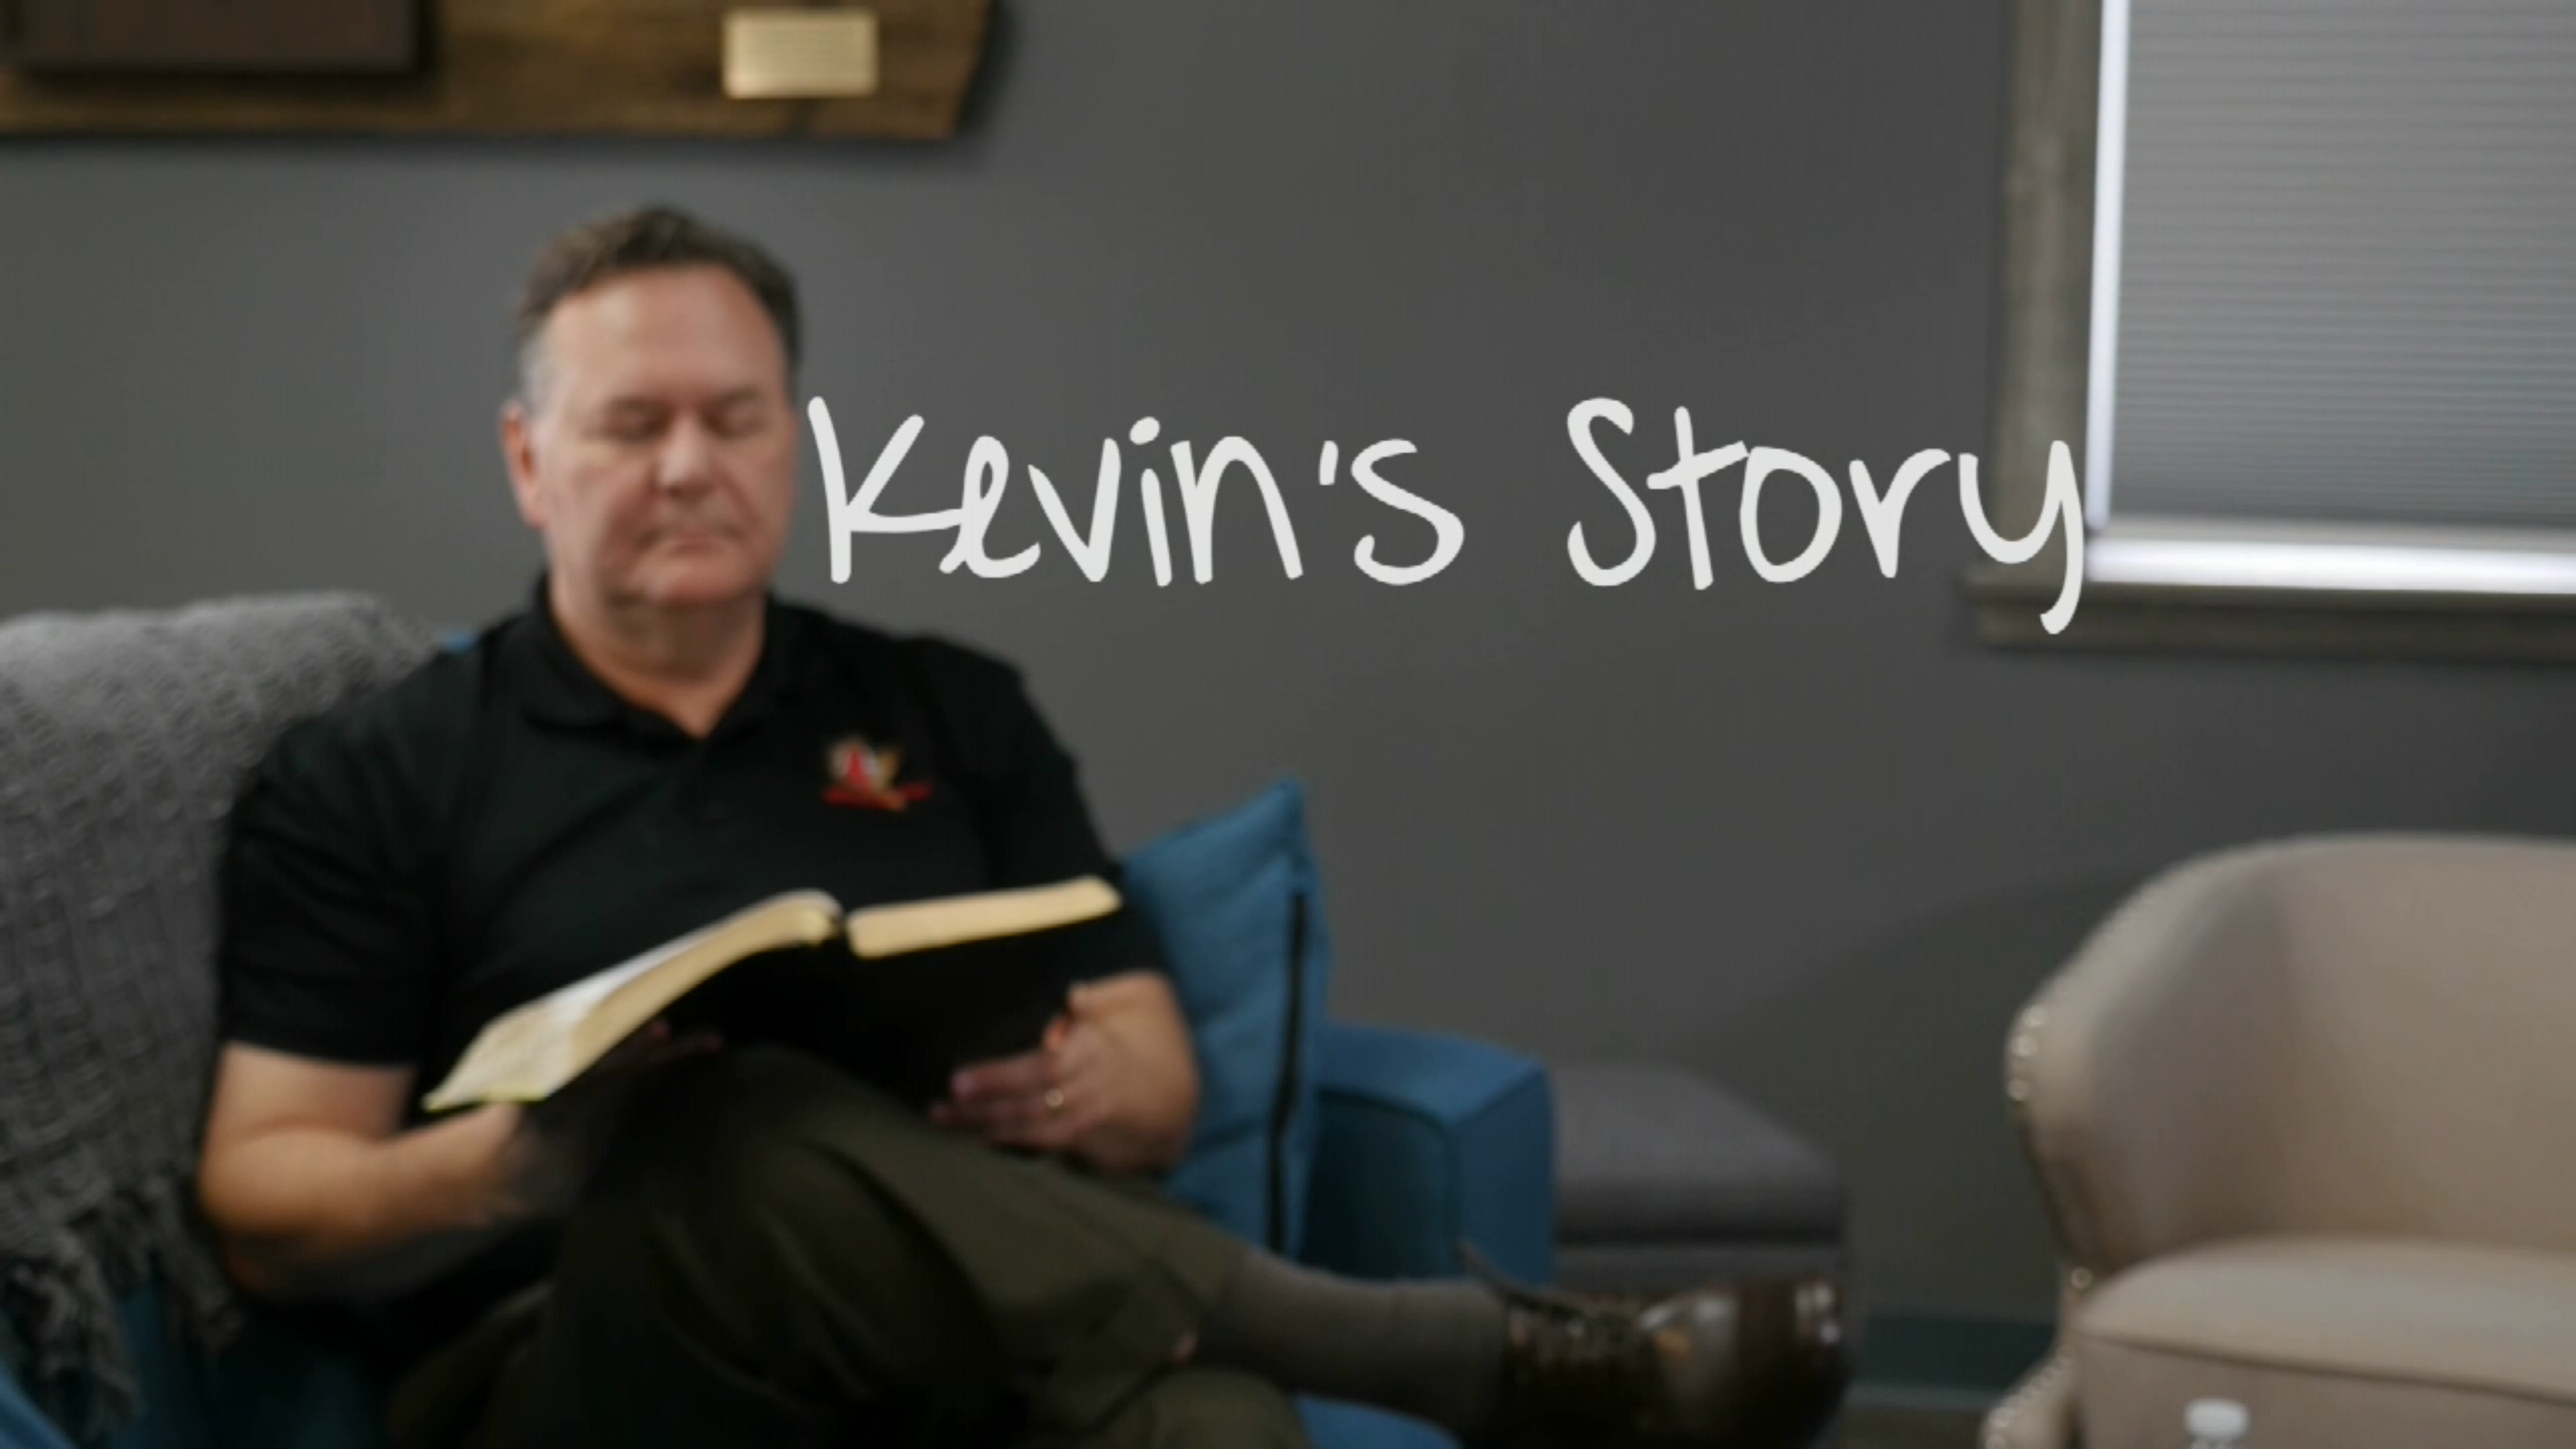 Kevin's Story